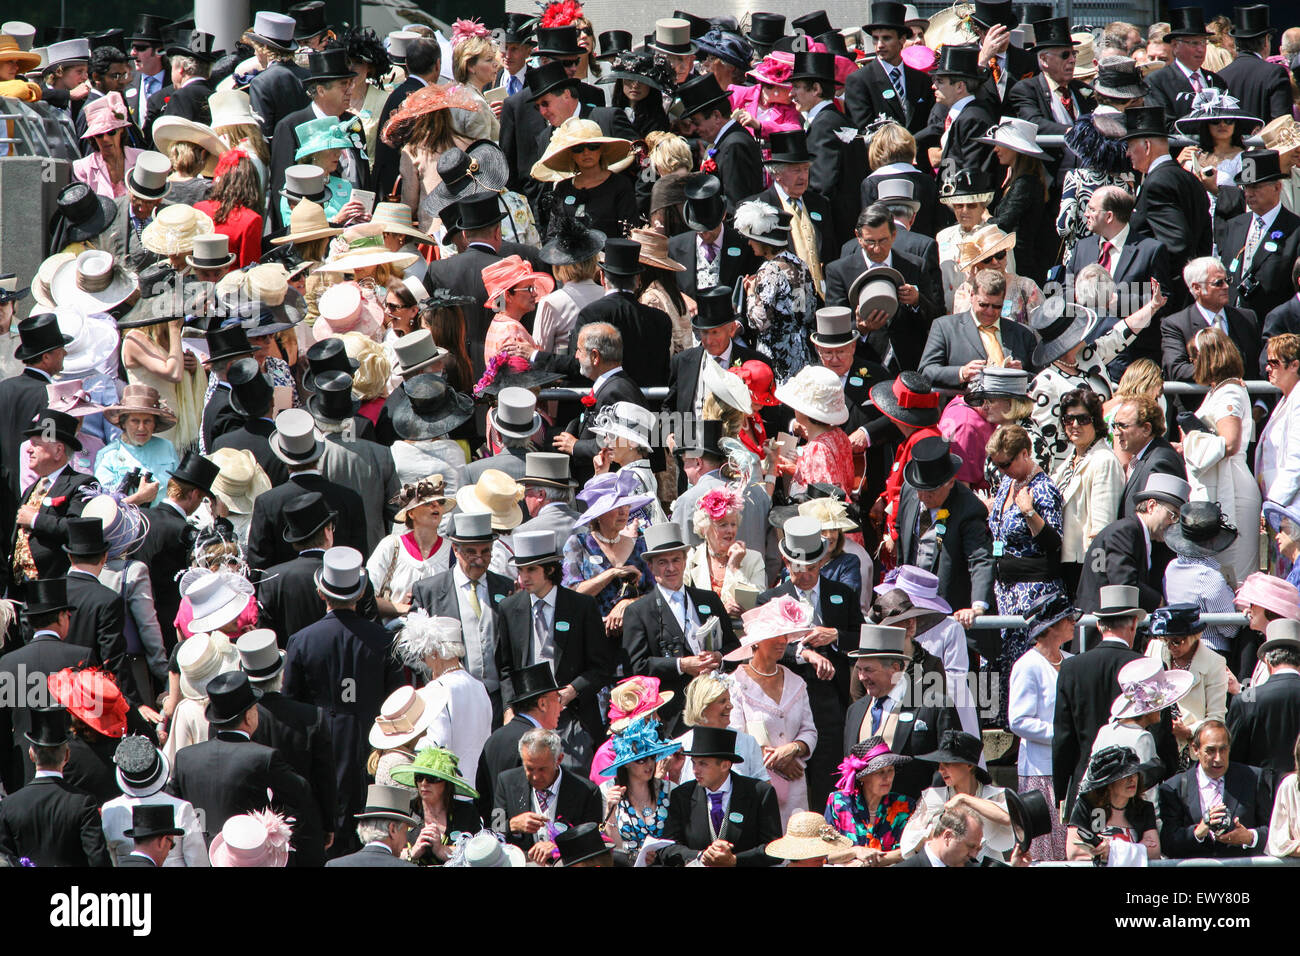 Top hats and fashionable clothes during Royal Ascot horse racing meeting, the world's most famous horse racing meeting. Attended Stock Photo